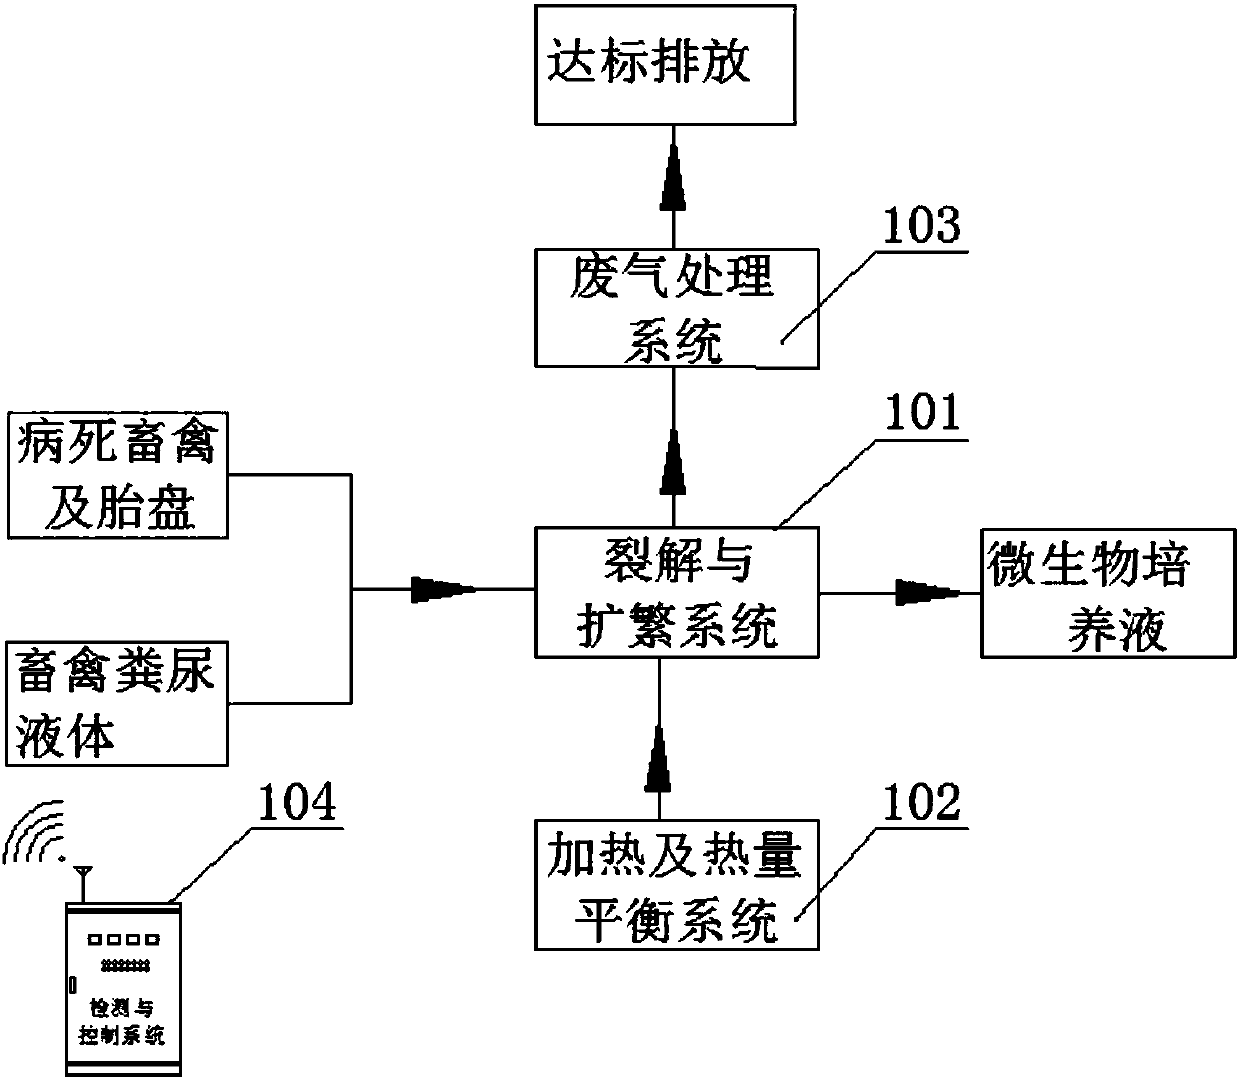 Treating system and method for livestock and poultry dying of disease